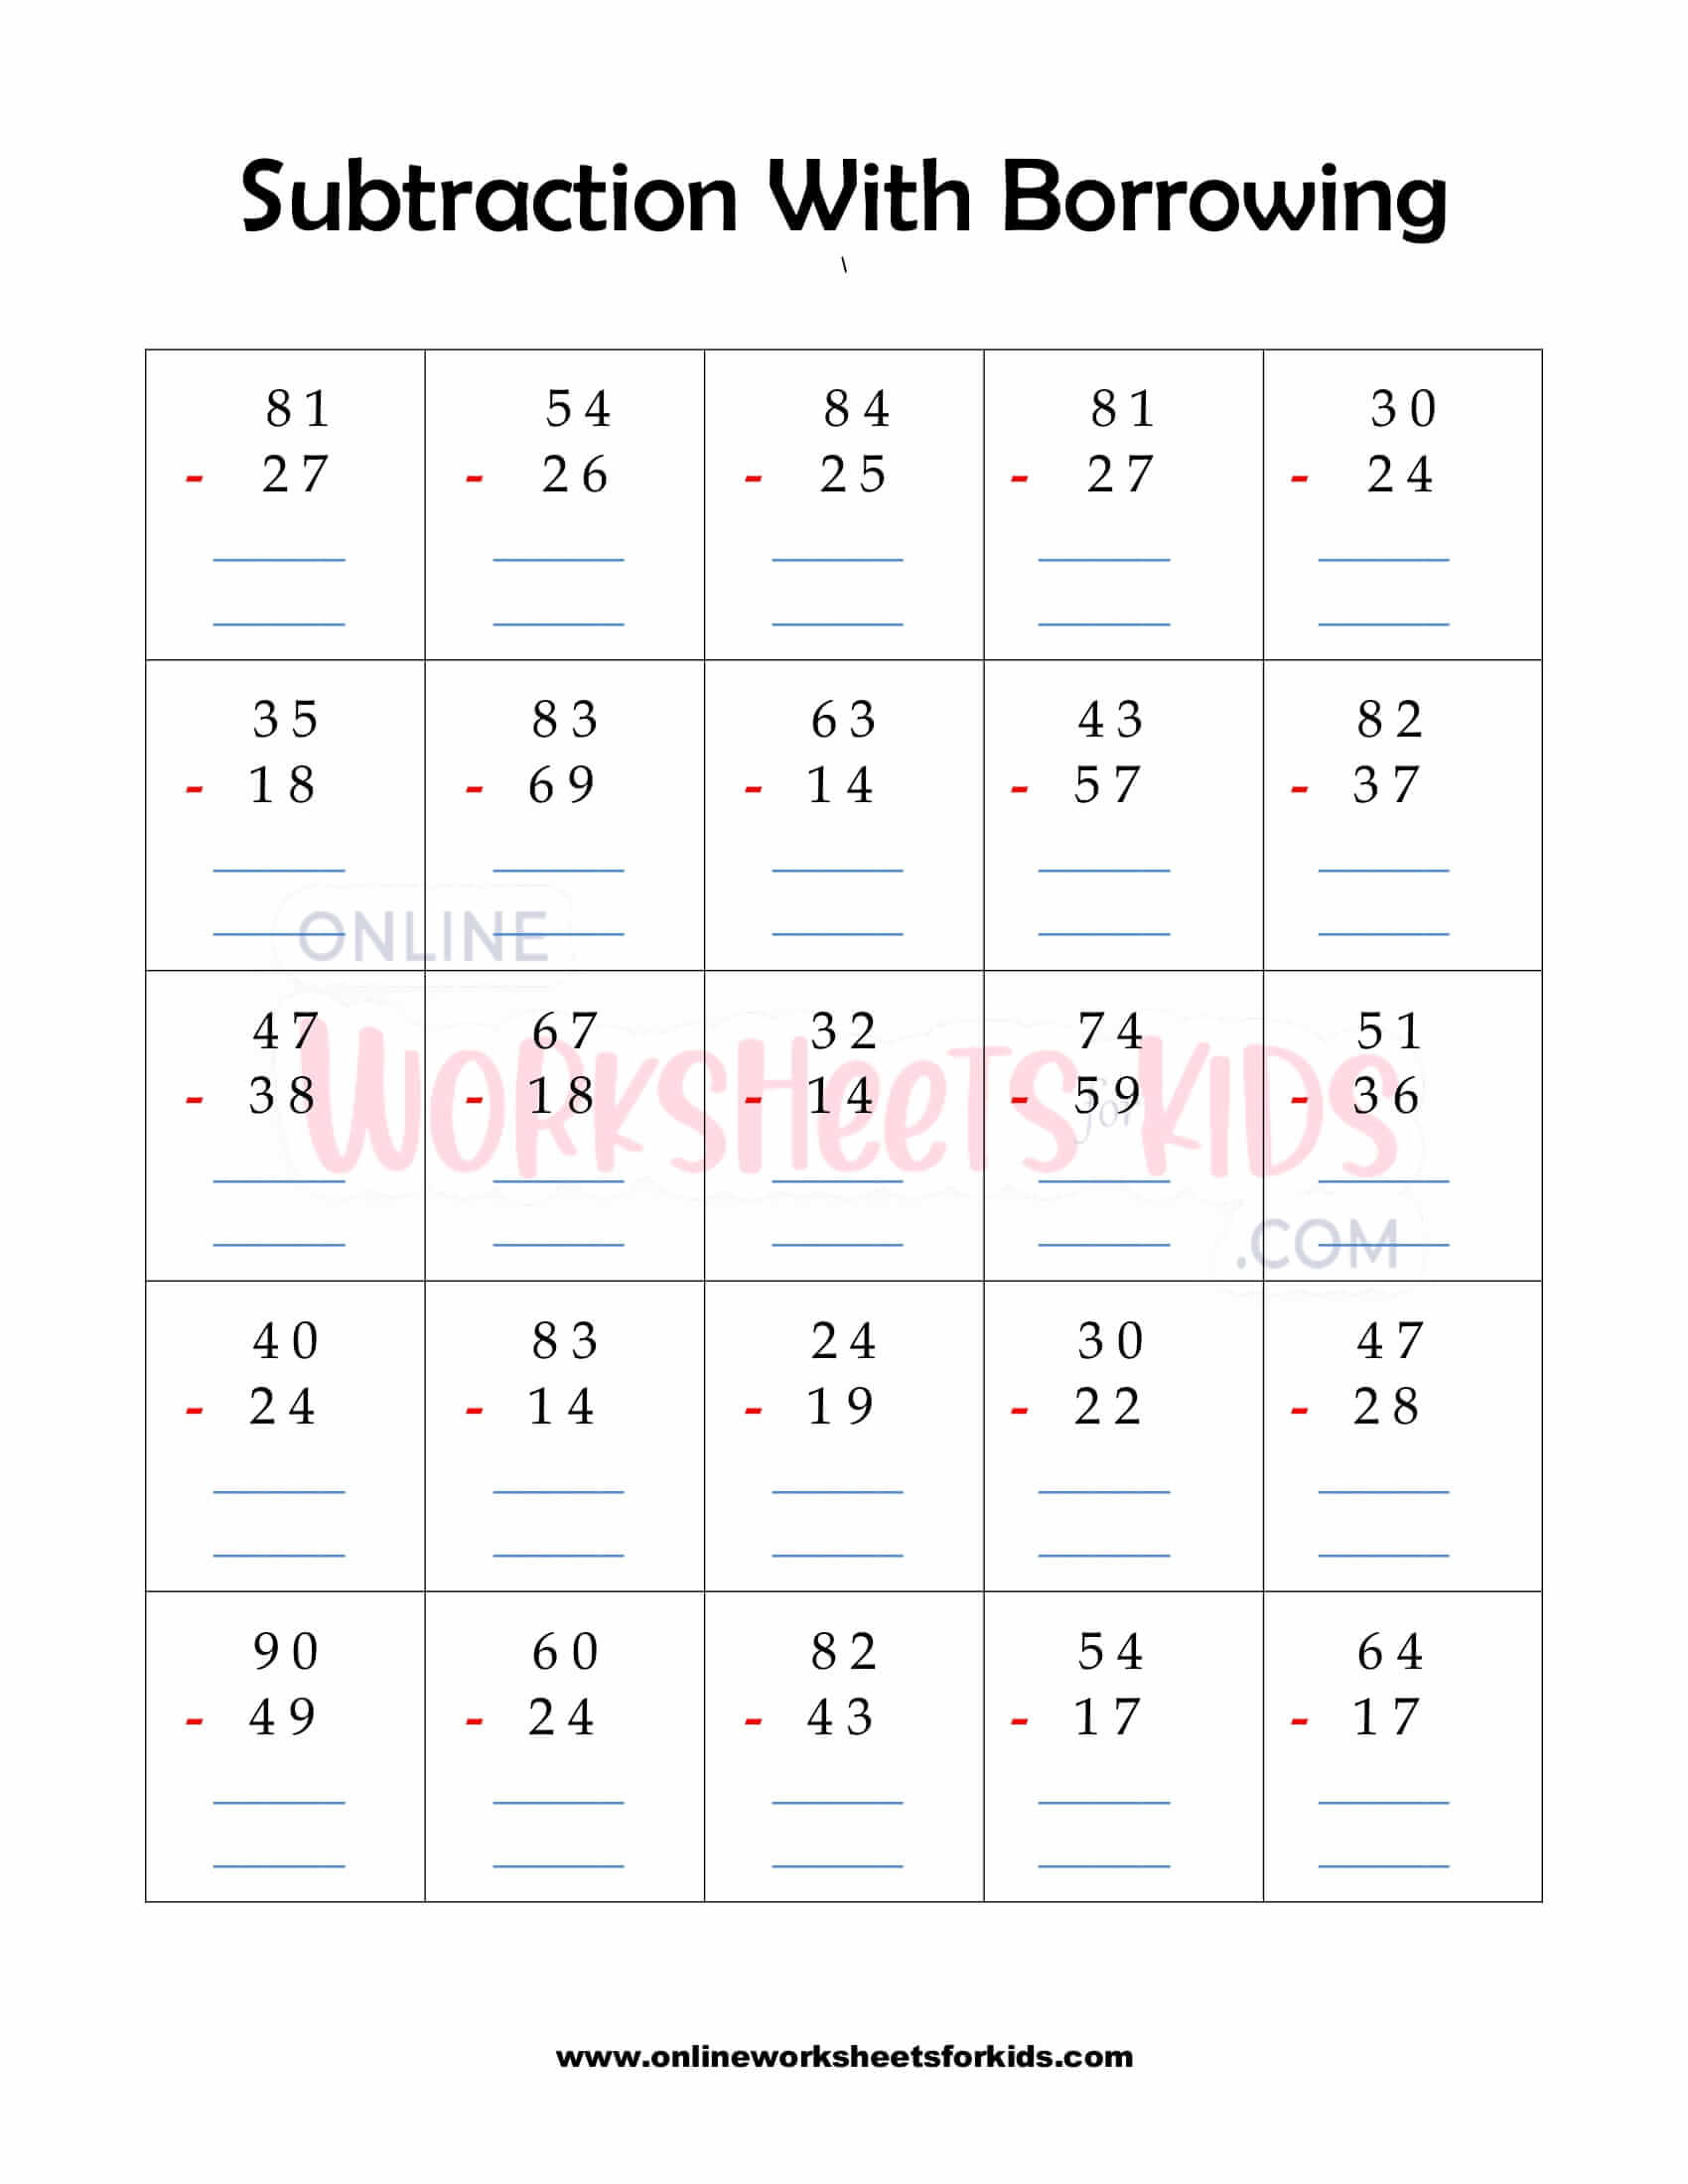 subtraction-with-borrowing-worksheet-4